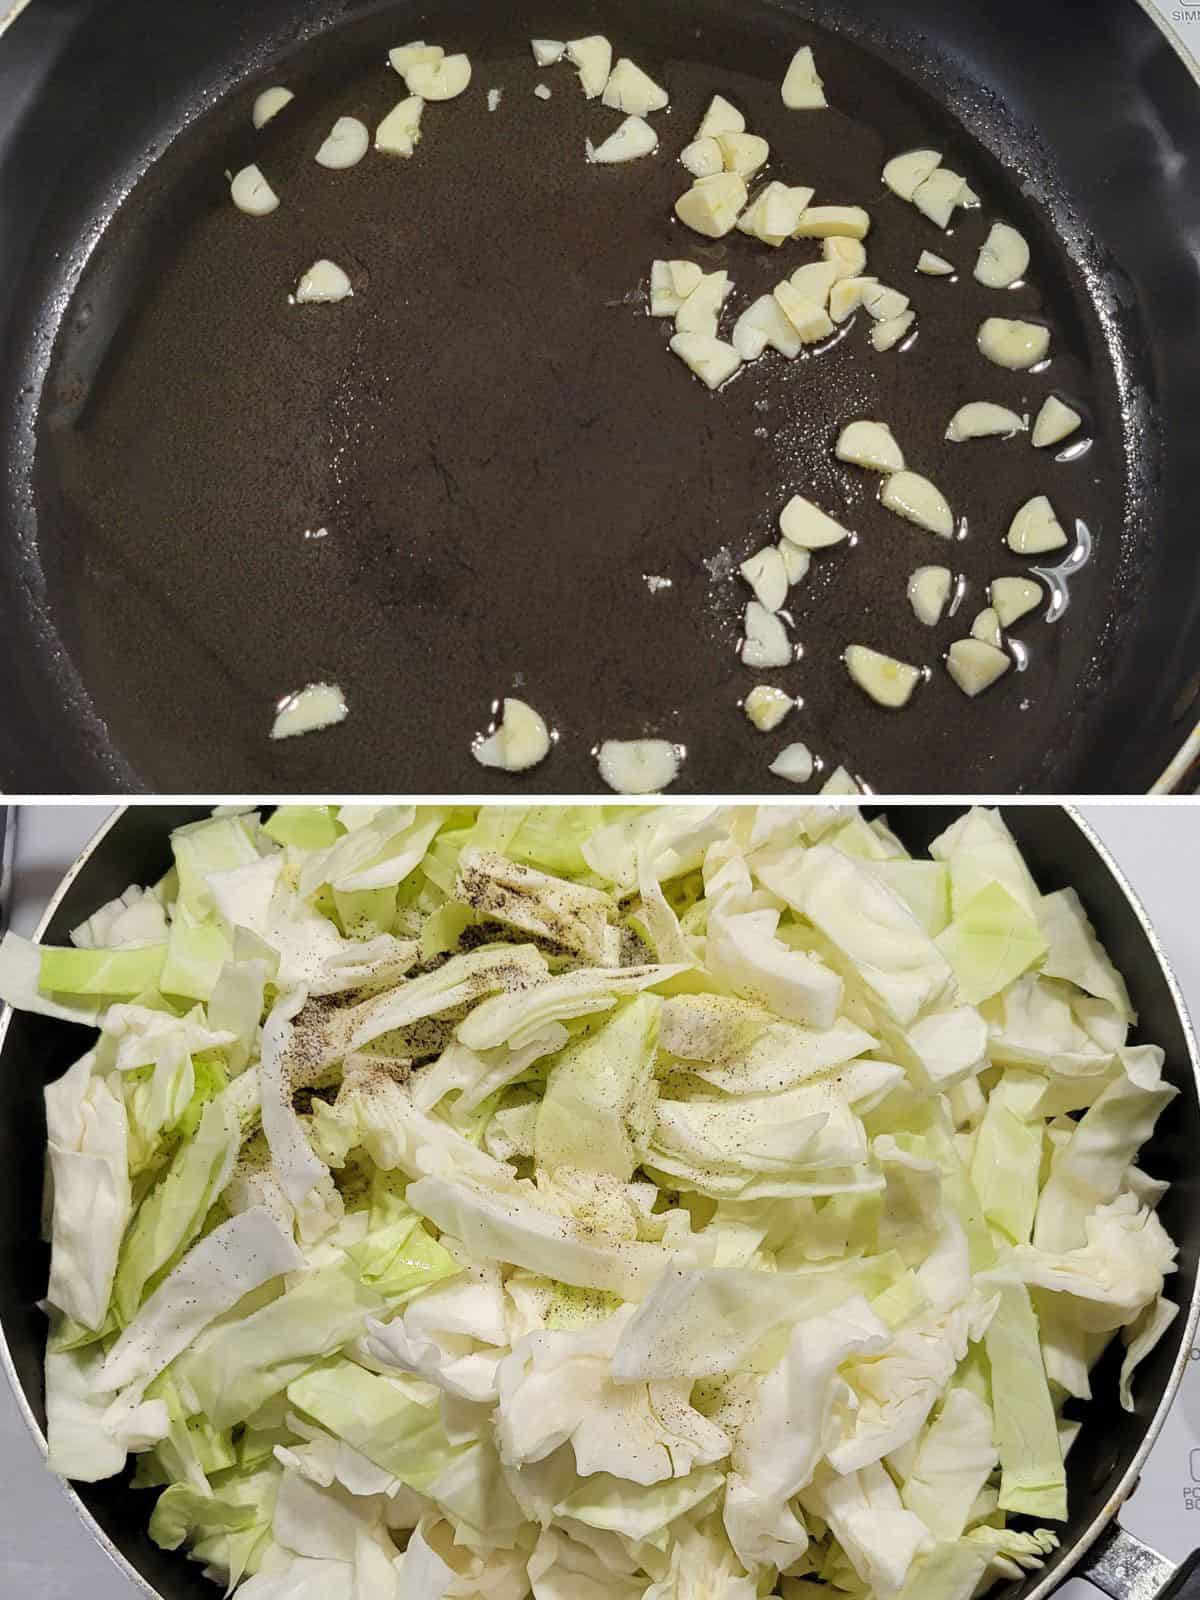 garlic sauteed in oil and cabbage added with salt and pepper